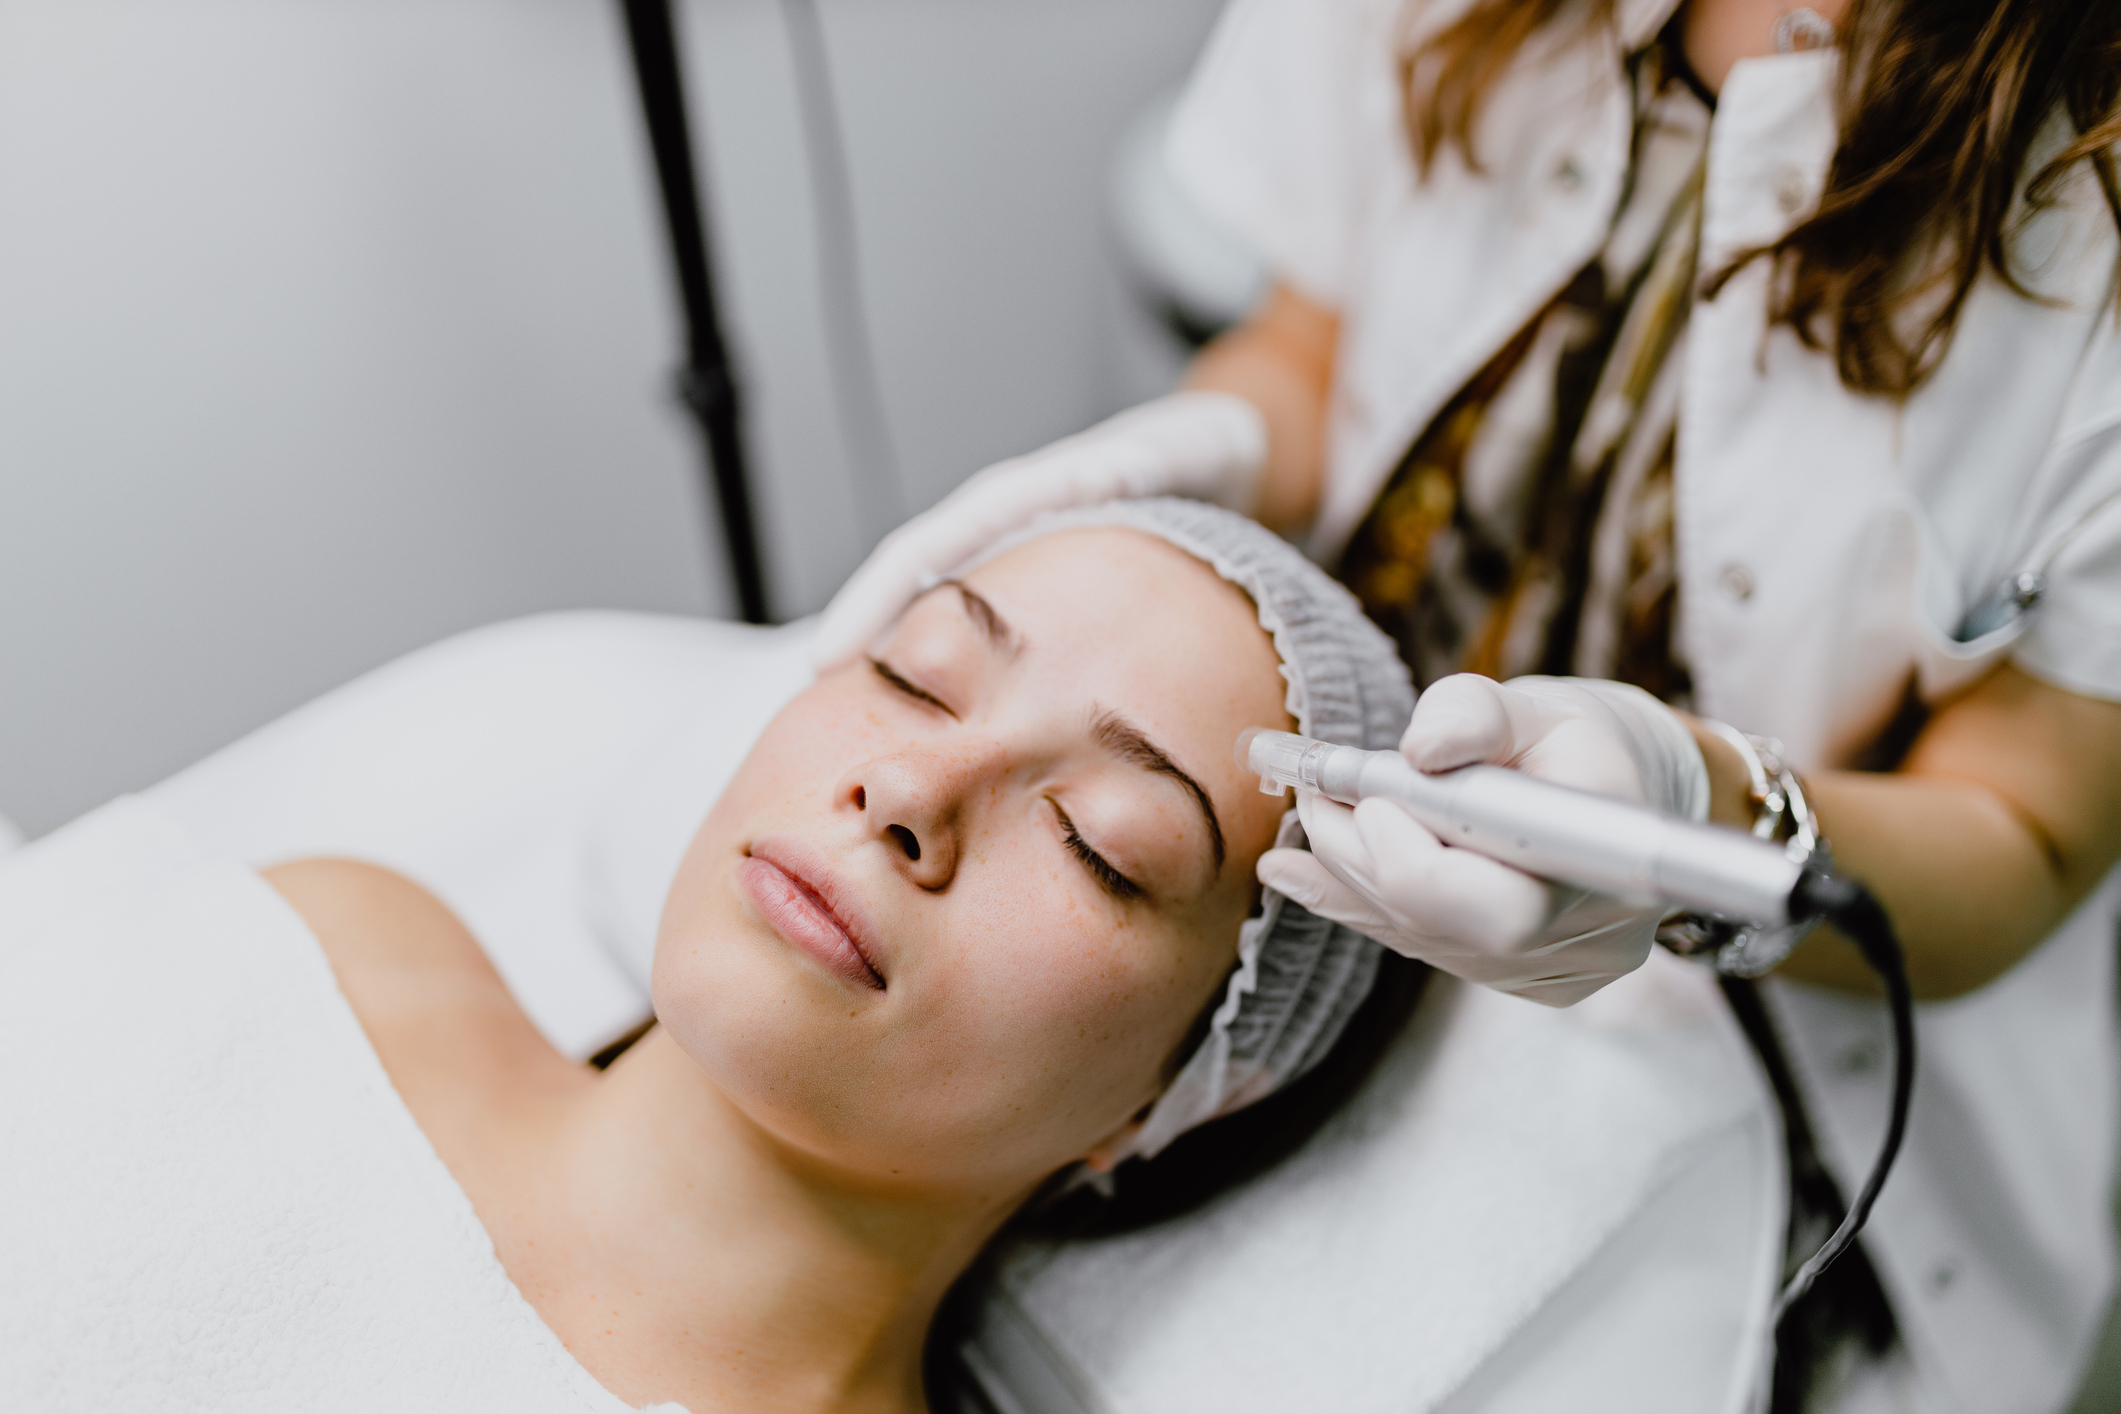 Young woman having a collagen induction therapy